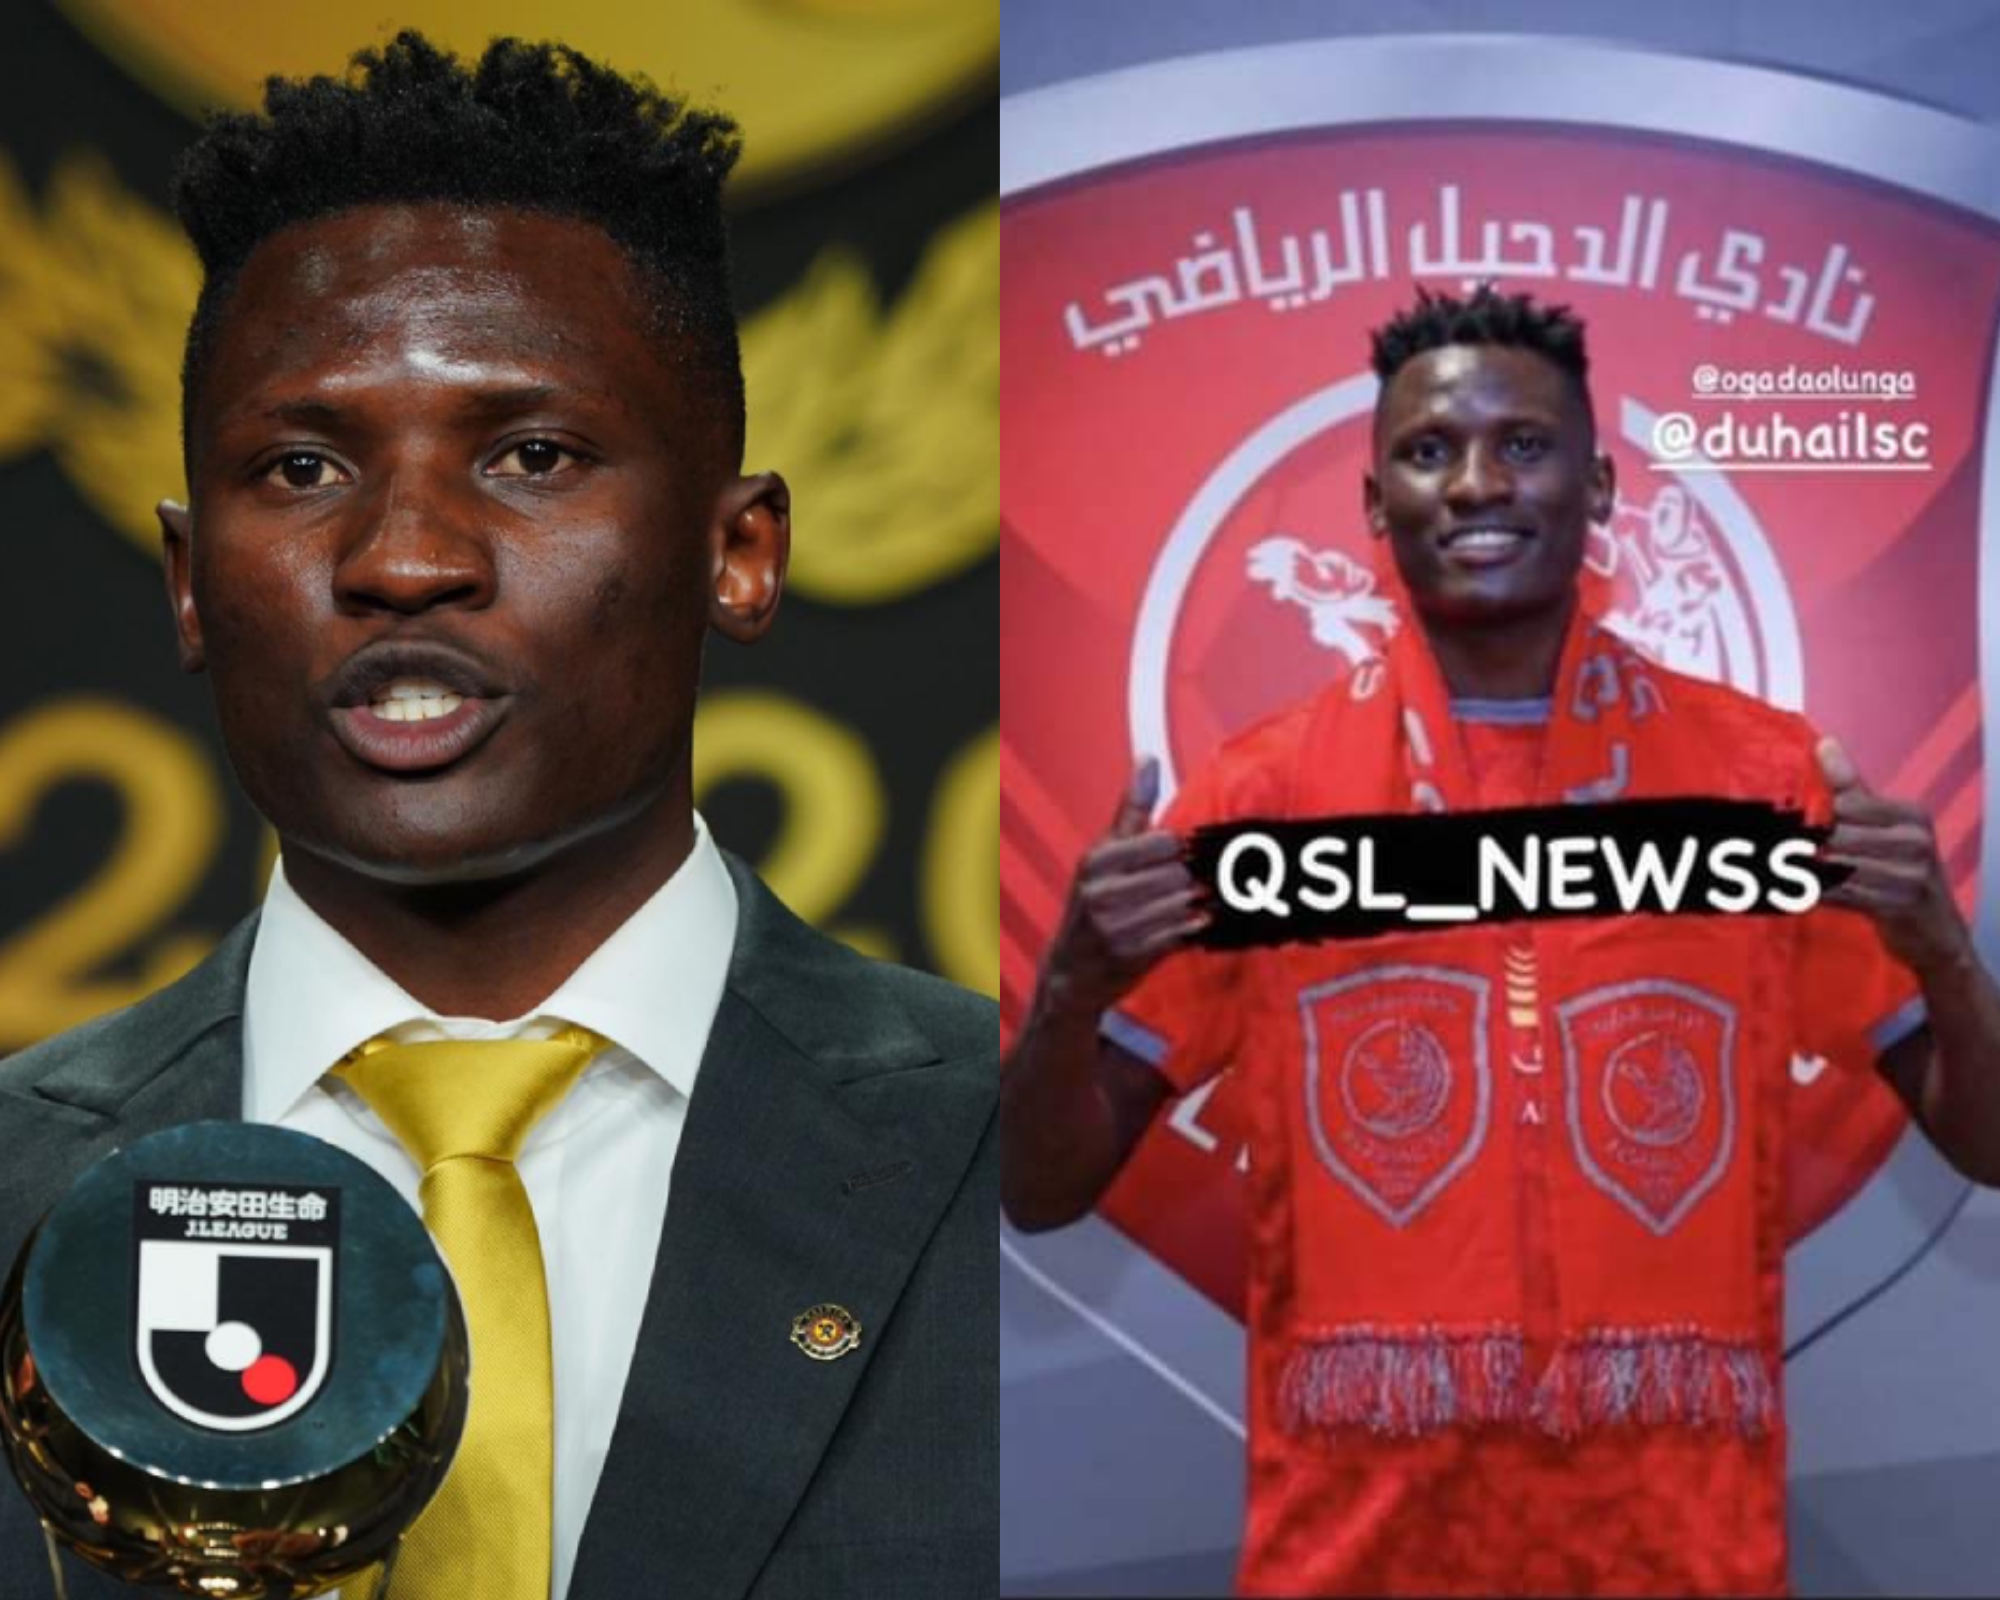 Michael Olunga pictured holding up an Al Duhail SC shirt (right)